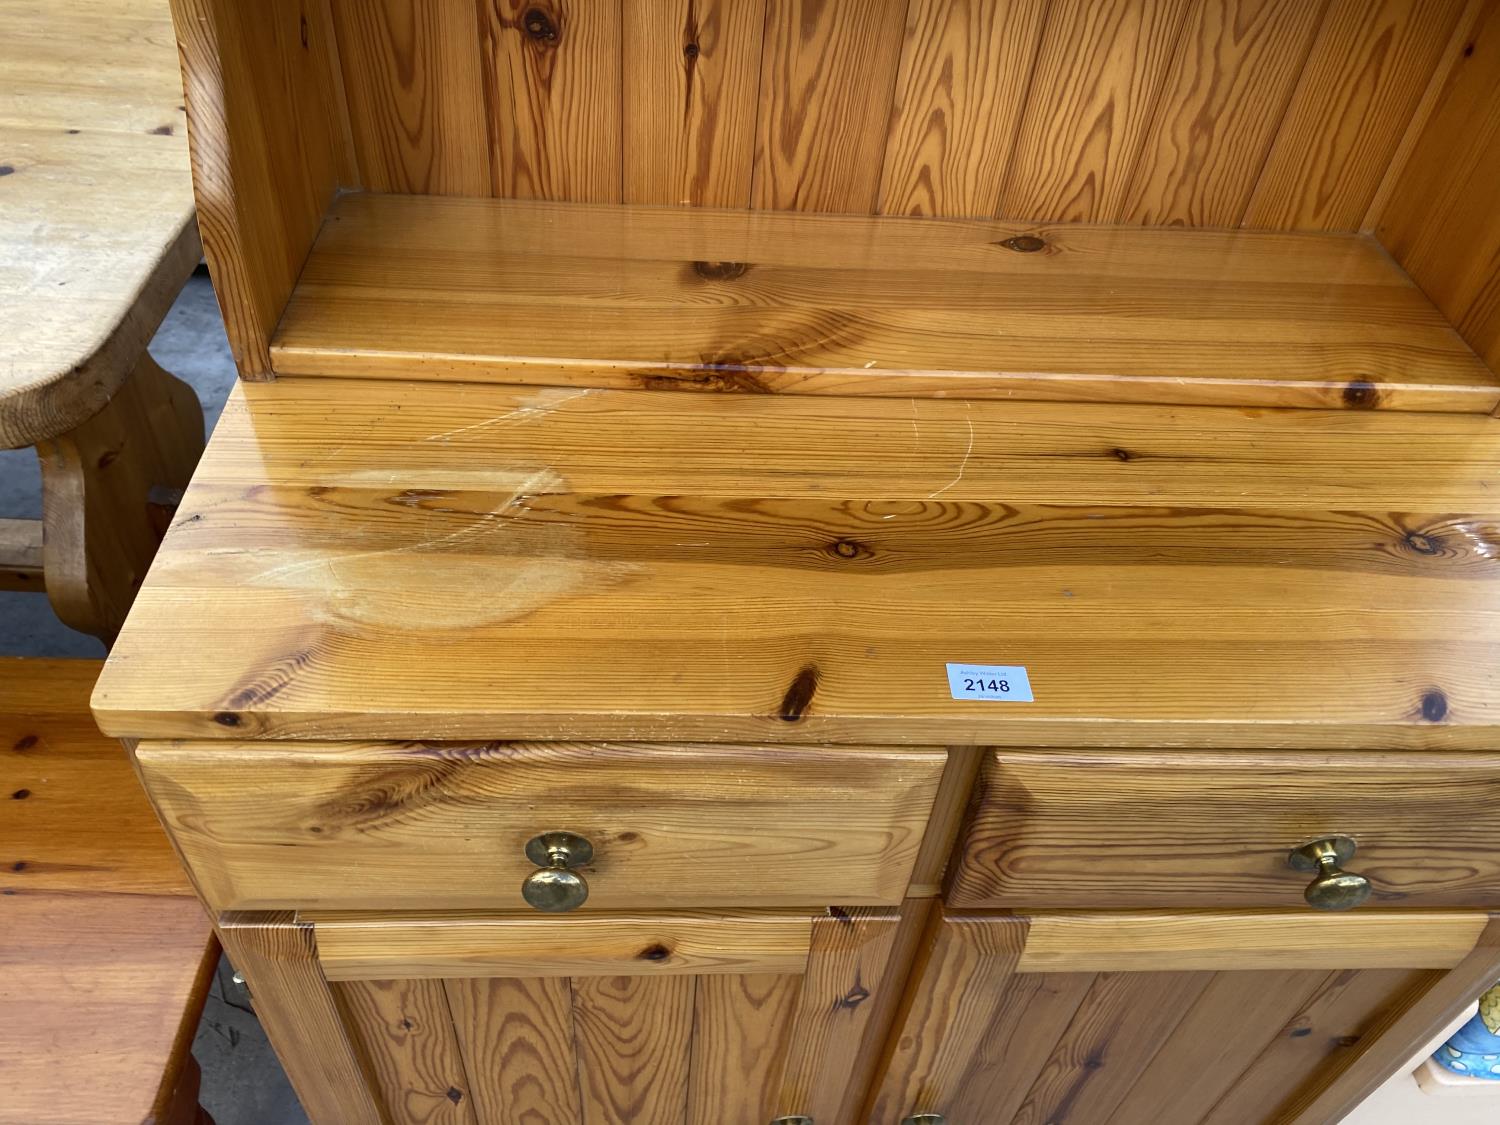 A MODERN PINE DRESSER COMPLETE WITH PLATE RACK, 31.5" WIDE - Image 3 of 4